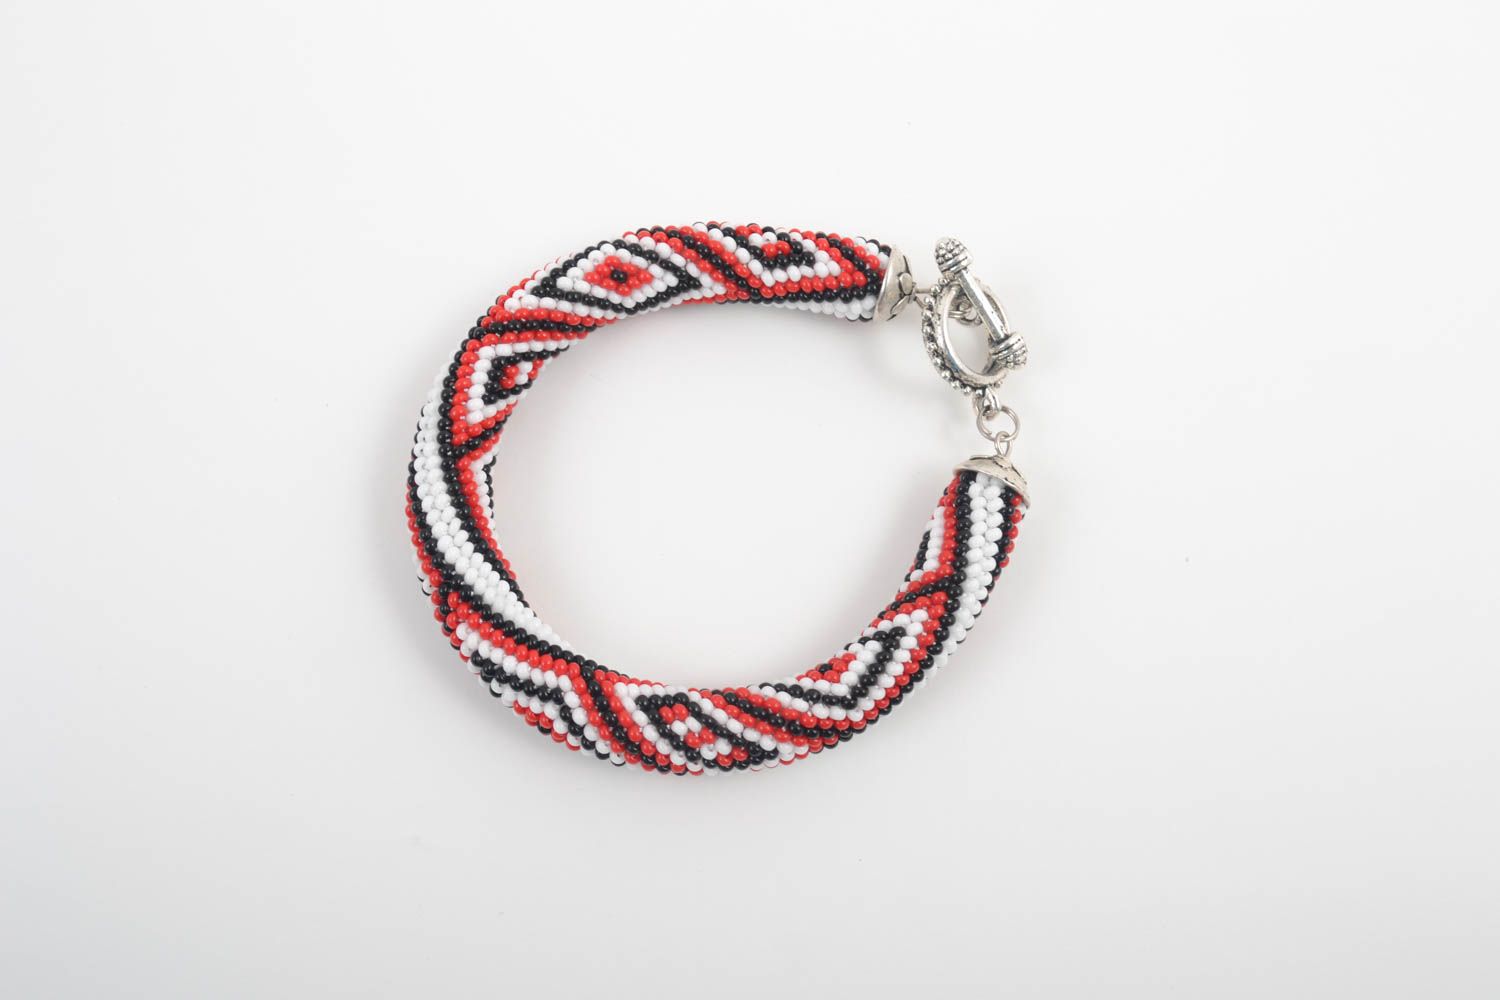 Red, black and white beads elegant cord bracelet with silver fittings photo 4